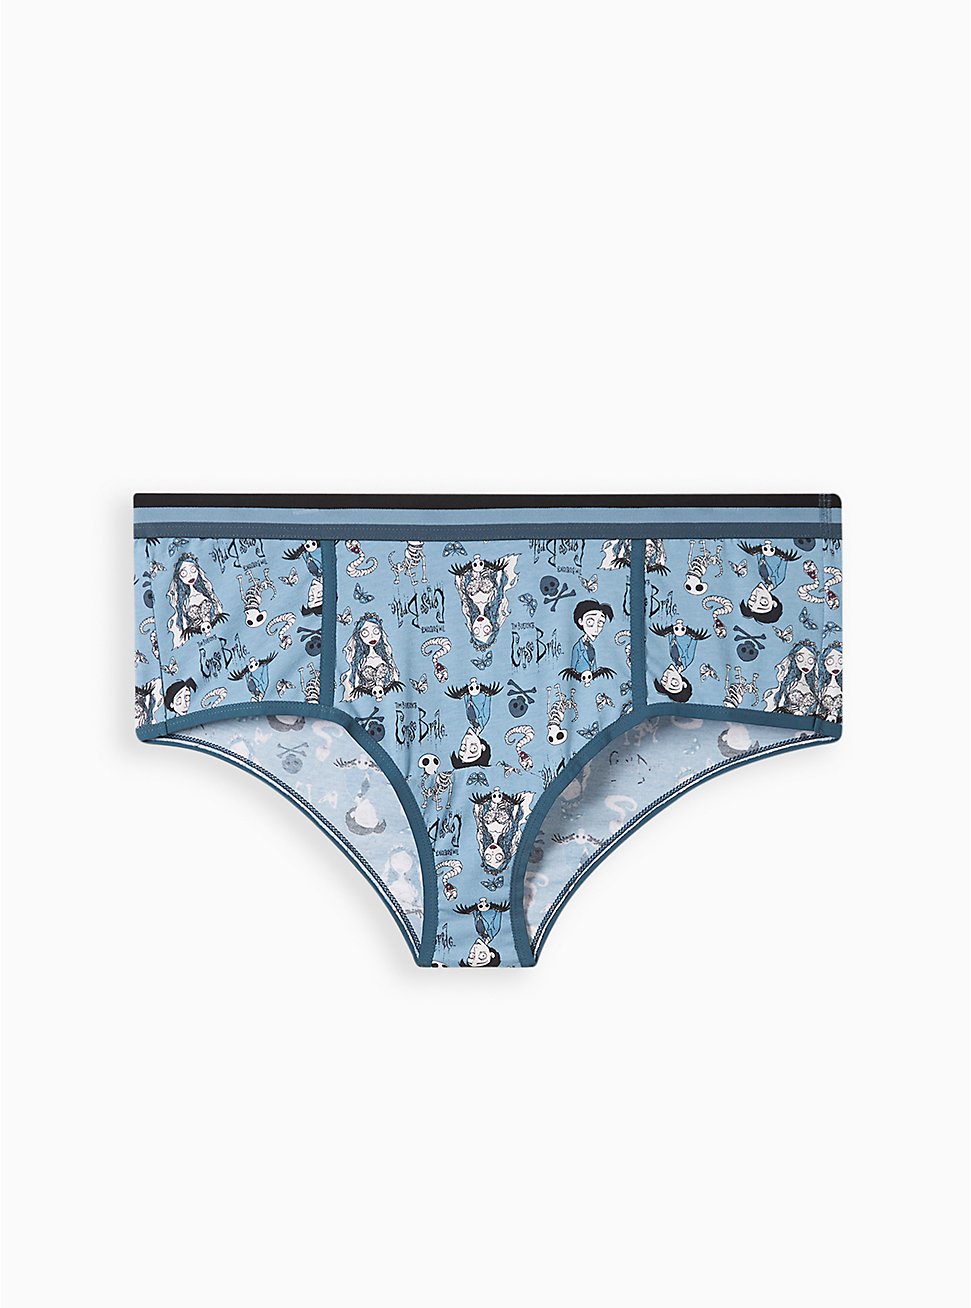 Corpse Bride Cotton Mid-Rise Cheeky Panty, MULTI, hi-res